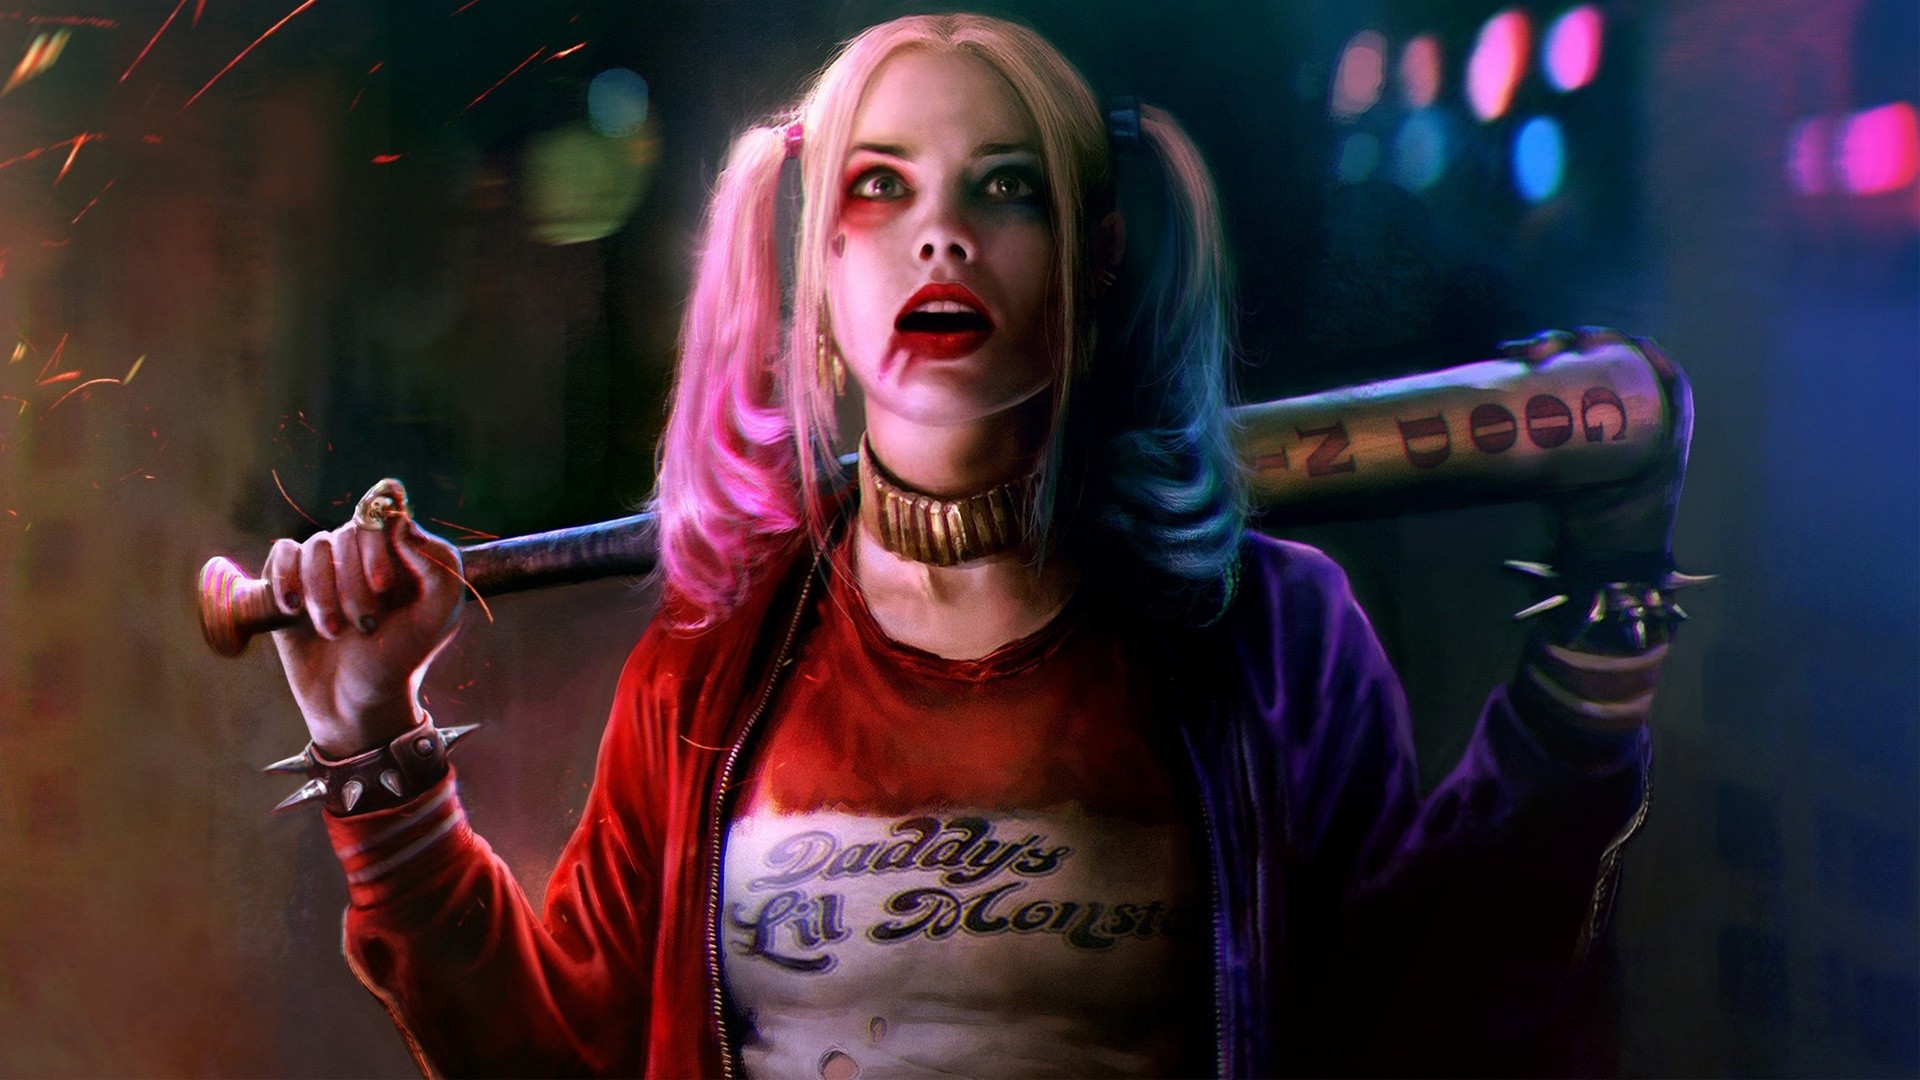 General 1920x1080 artwork women open mouth looking up printed shirts Harley Quinn DC Comics